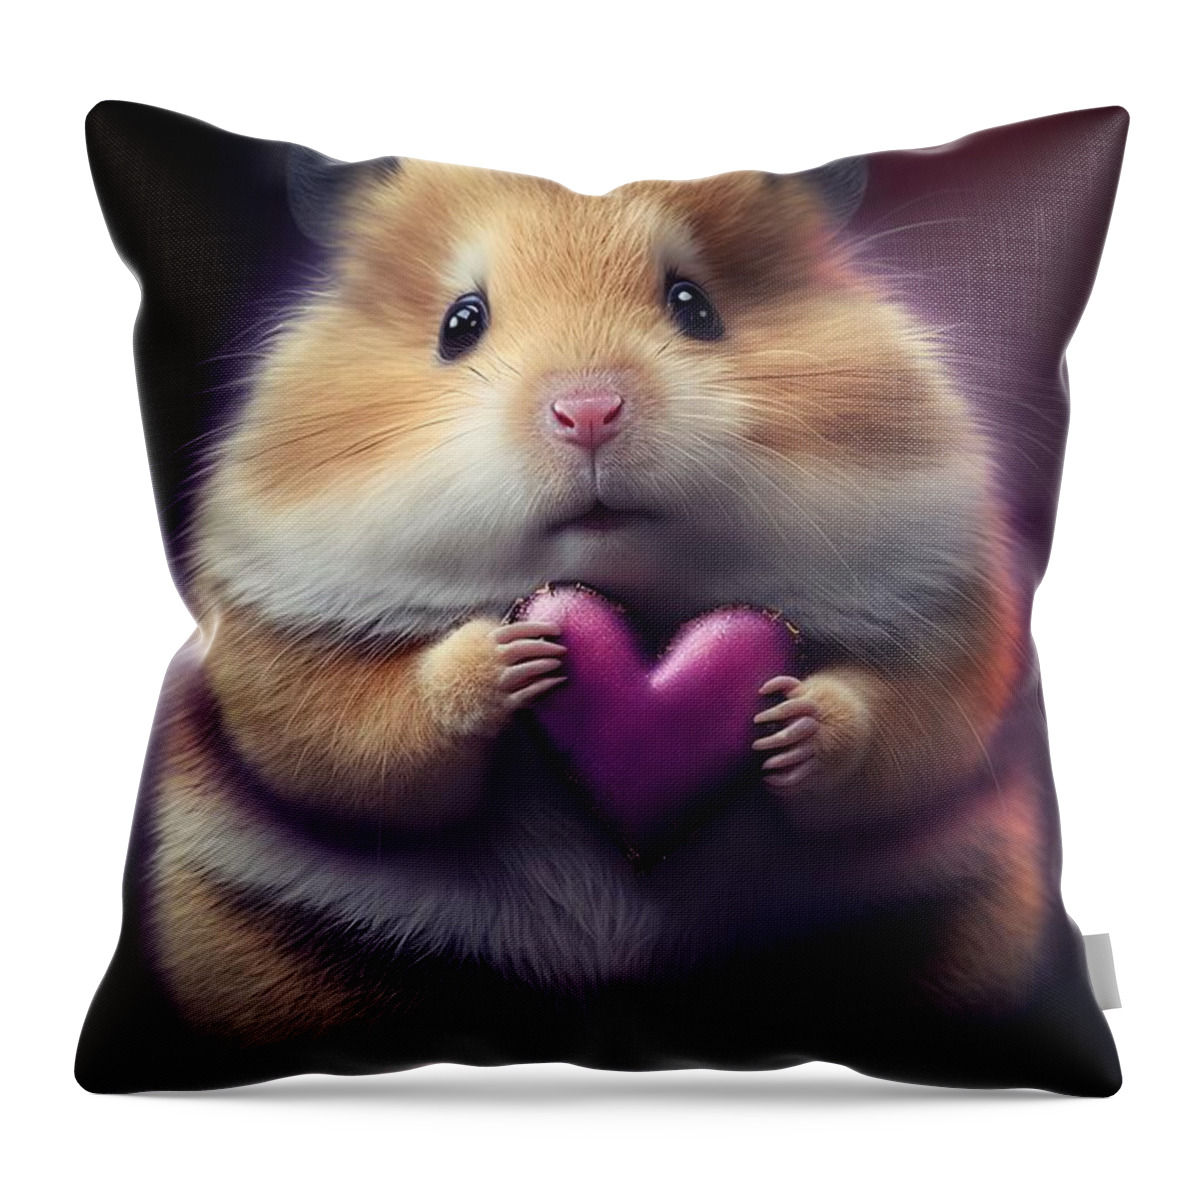 Hamster With Heart Throw Pillow featuring the mixed media Hamster with Heart by Lilia S